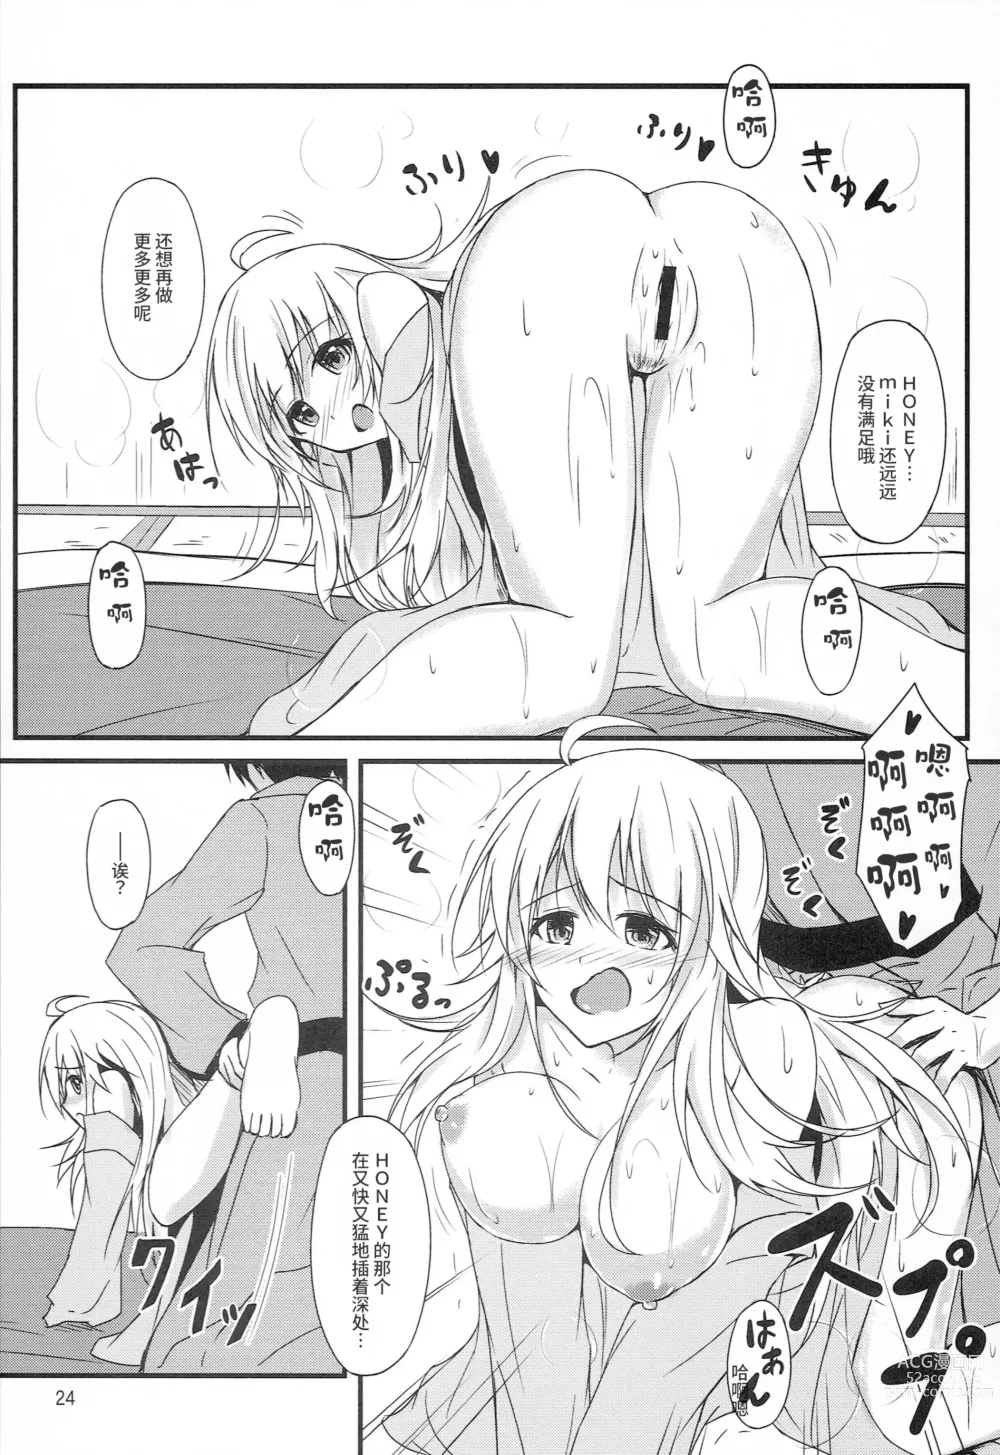 Page 22 of doujinshi Miki to Honey no DeepLove